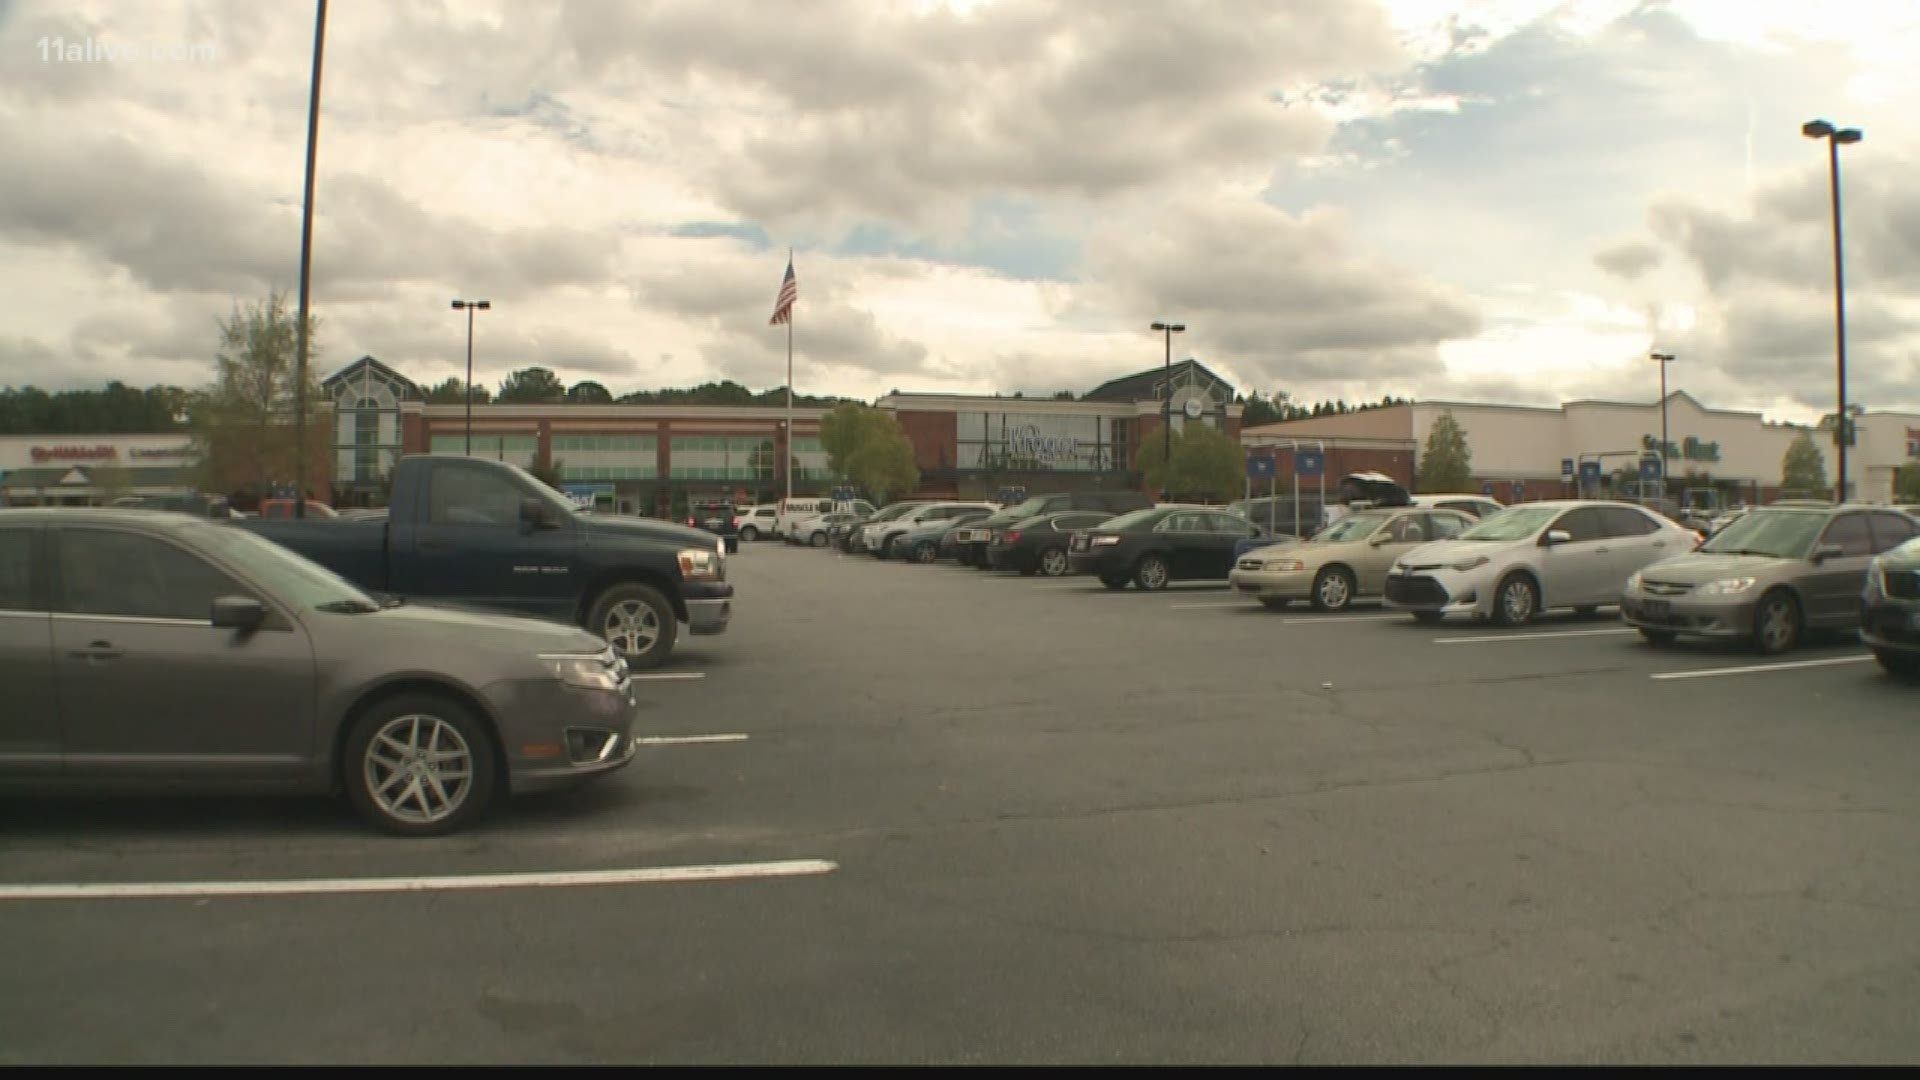 Last week, several Snellville Kroger customers and managers complained to police that three women attempted to recruit customers to join a bible study.